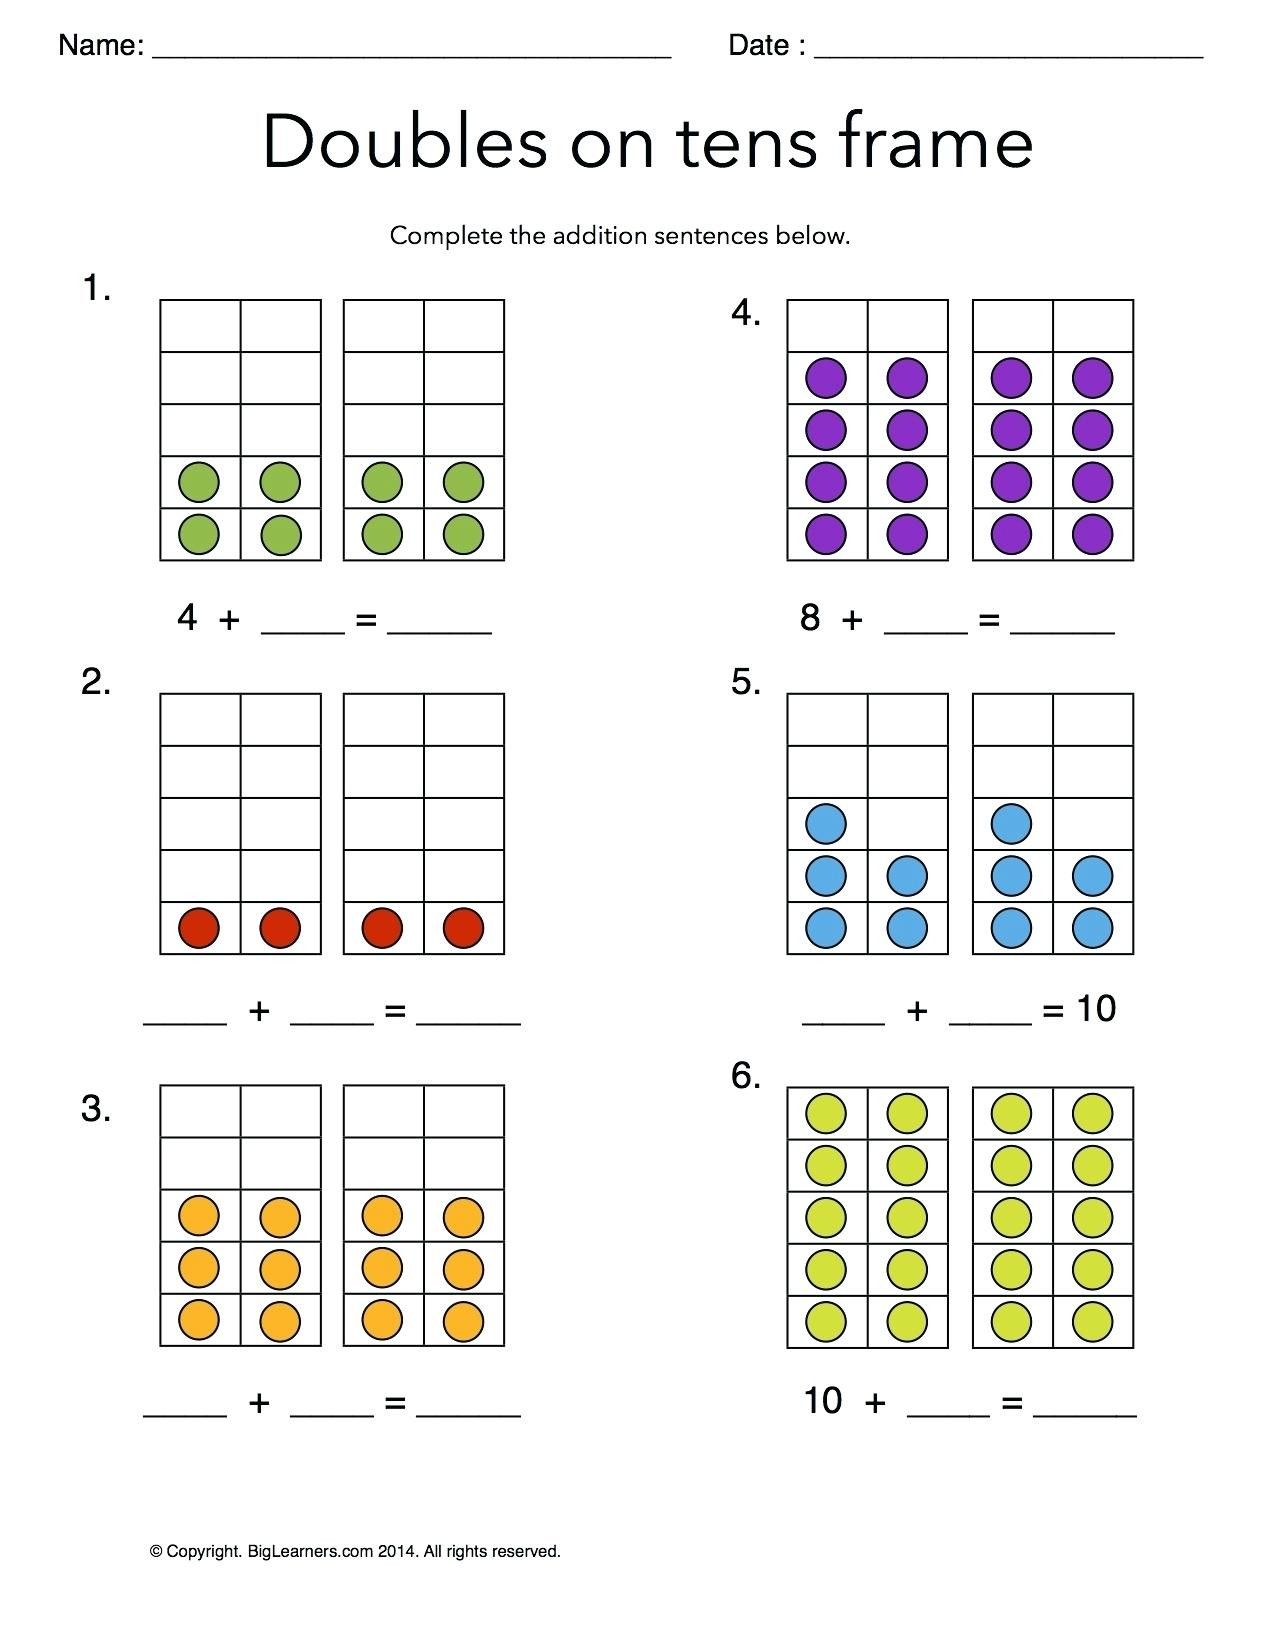 Free Math Worksheets First Grade 1 Addition Adding whole Tens 2 Digits Missing Addend